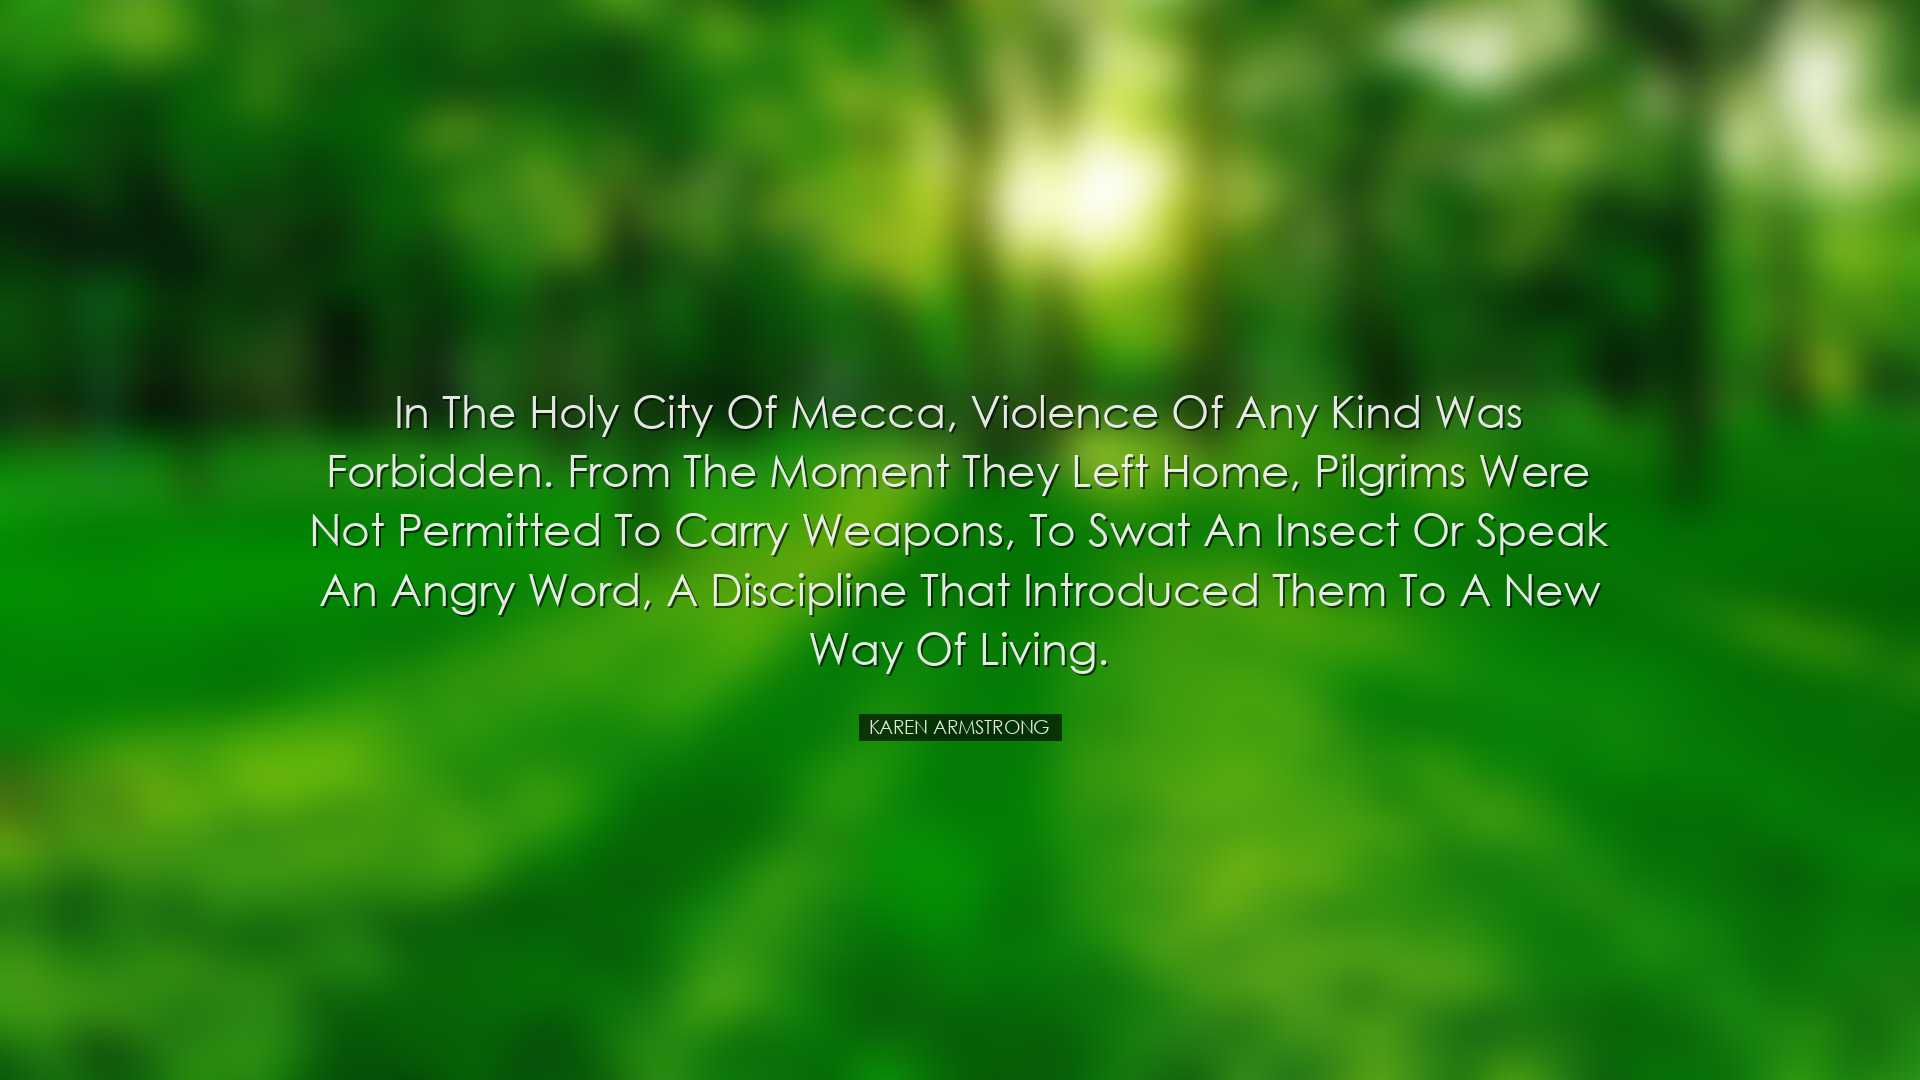 In the holy city of Mecca, violence of any kind was forbidden. Fro